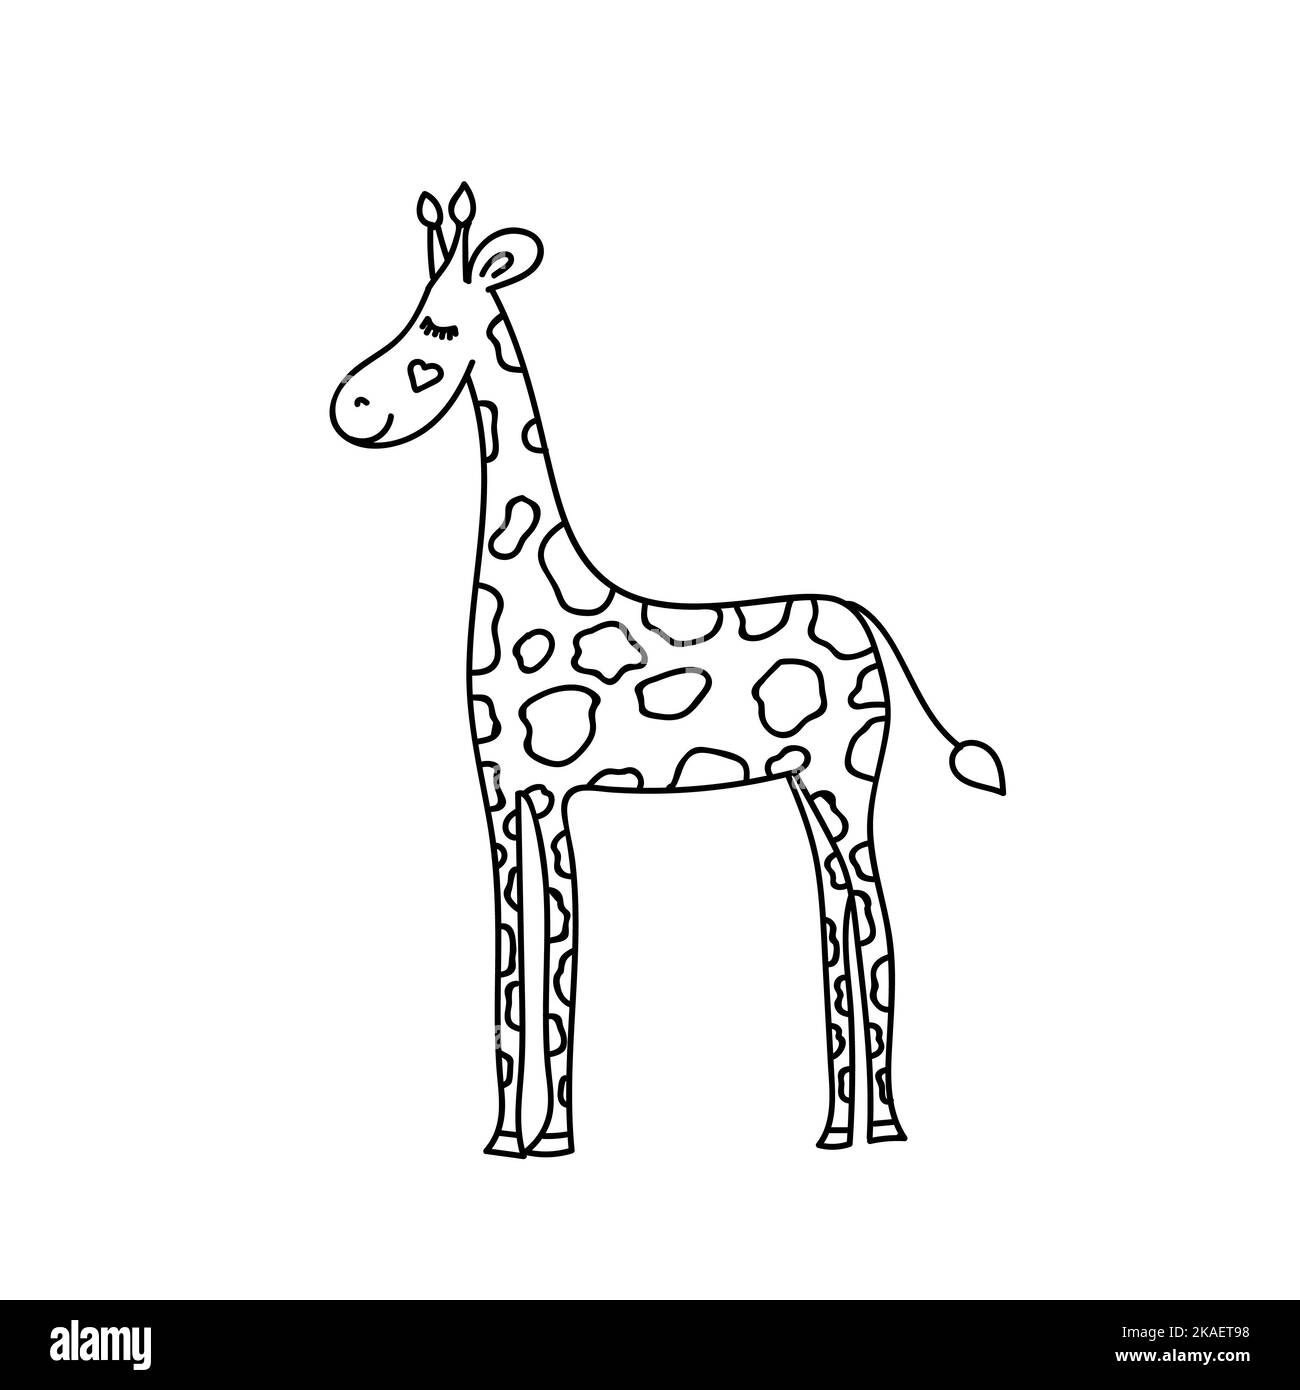 Vector illustration of funny cartoon style giraffe. Coloring book element Stock Photo